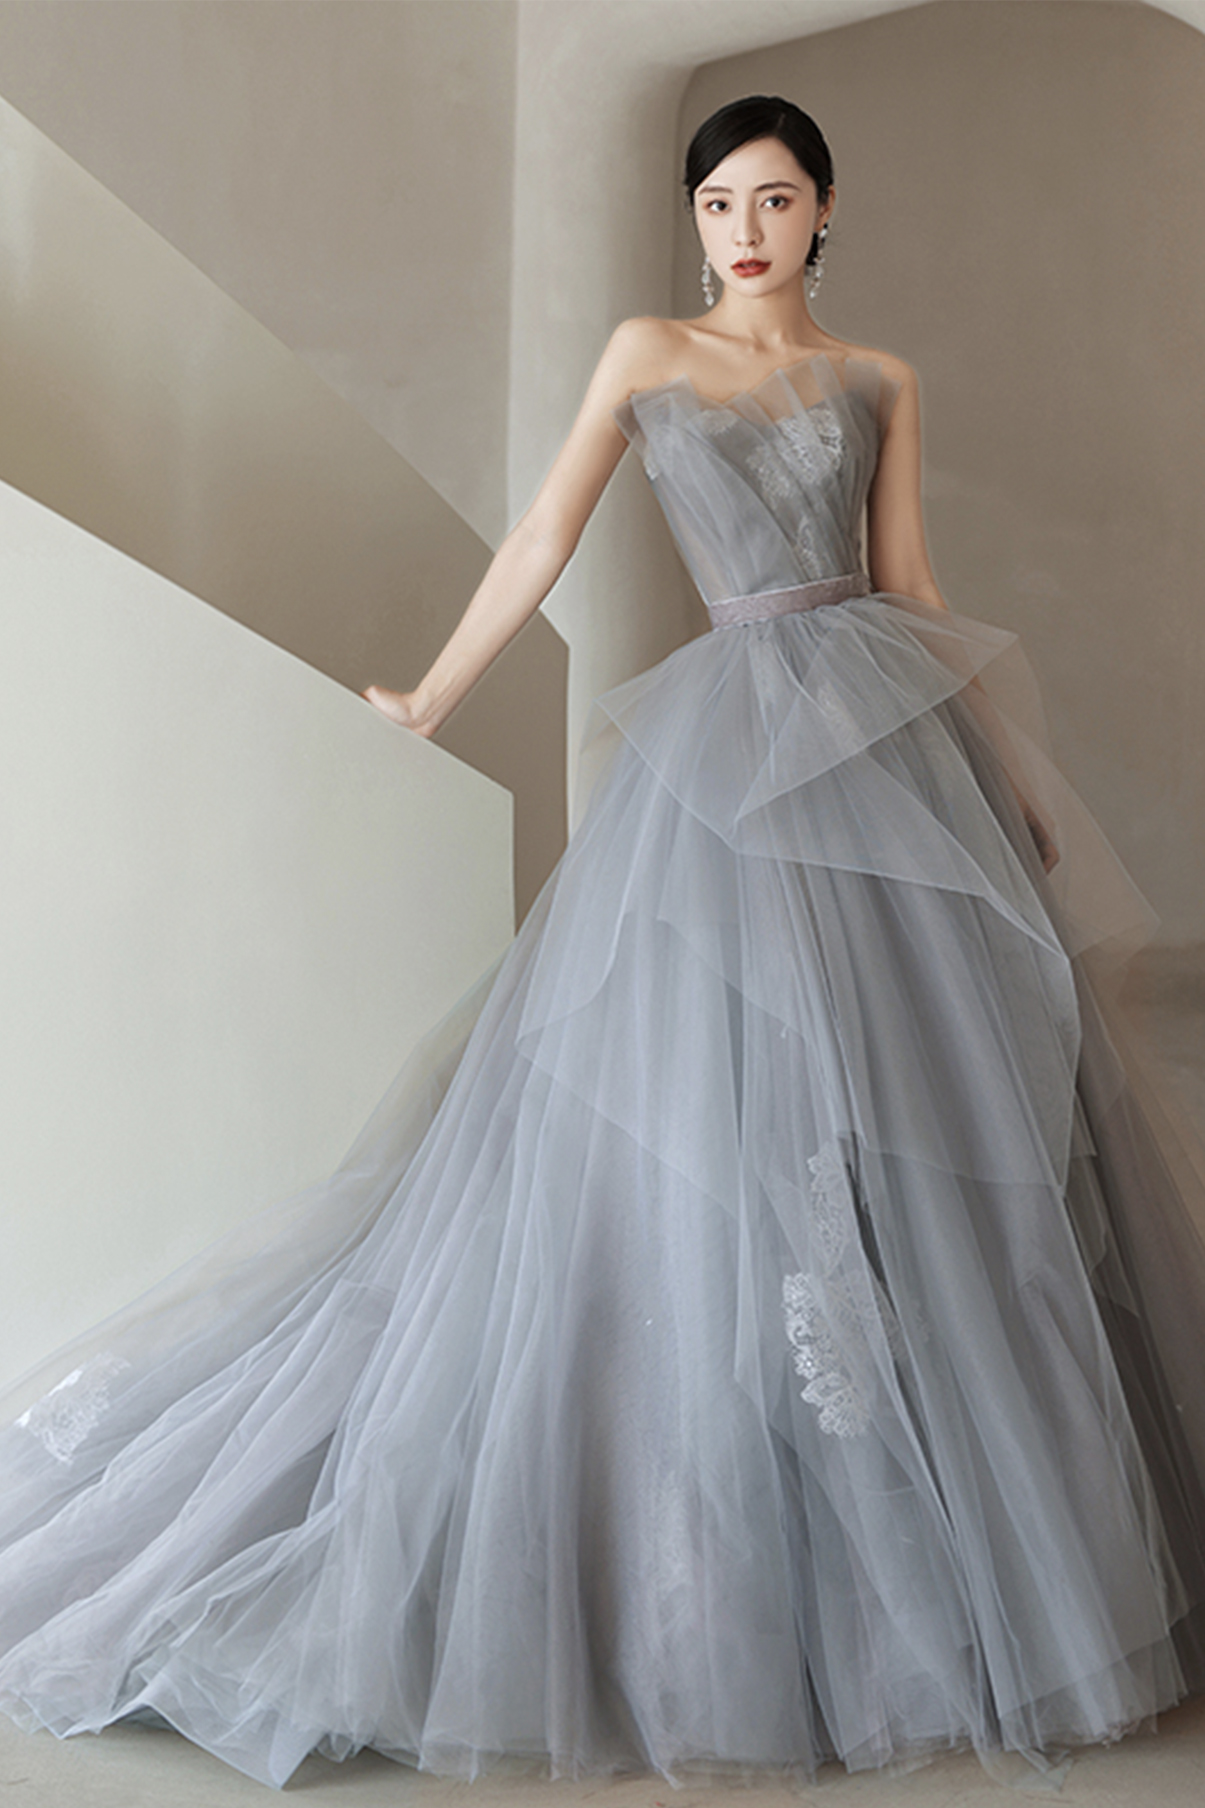 Gray Tulle Lace Long Ball Gown Dress Formal Dress,pl3720